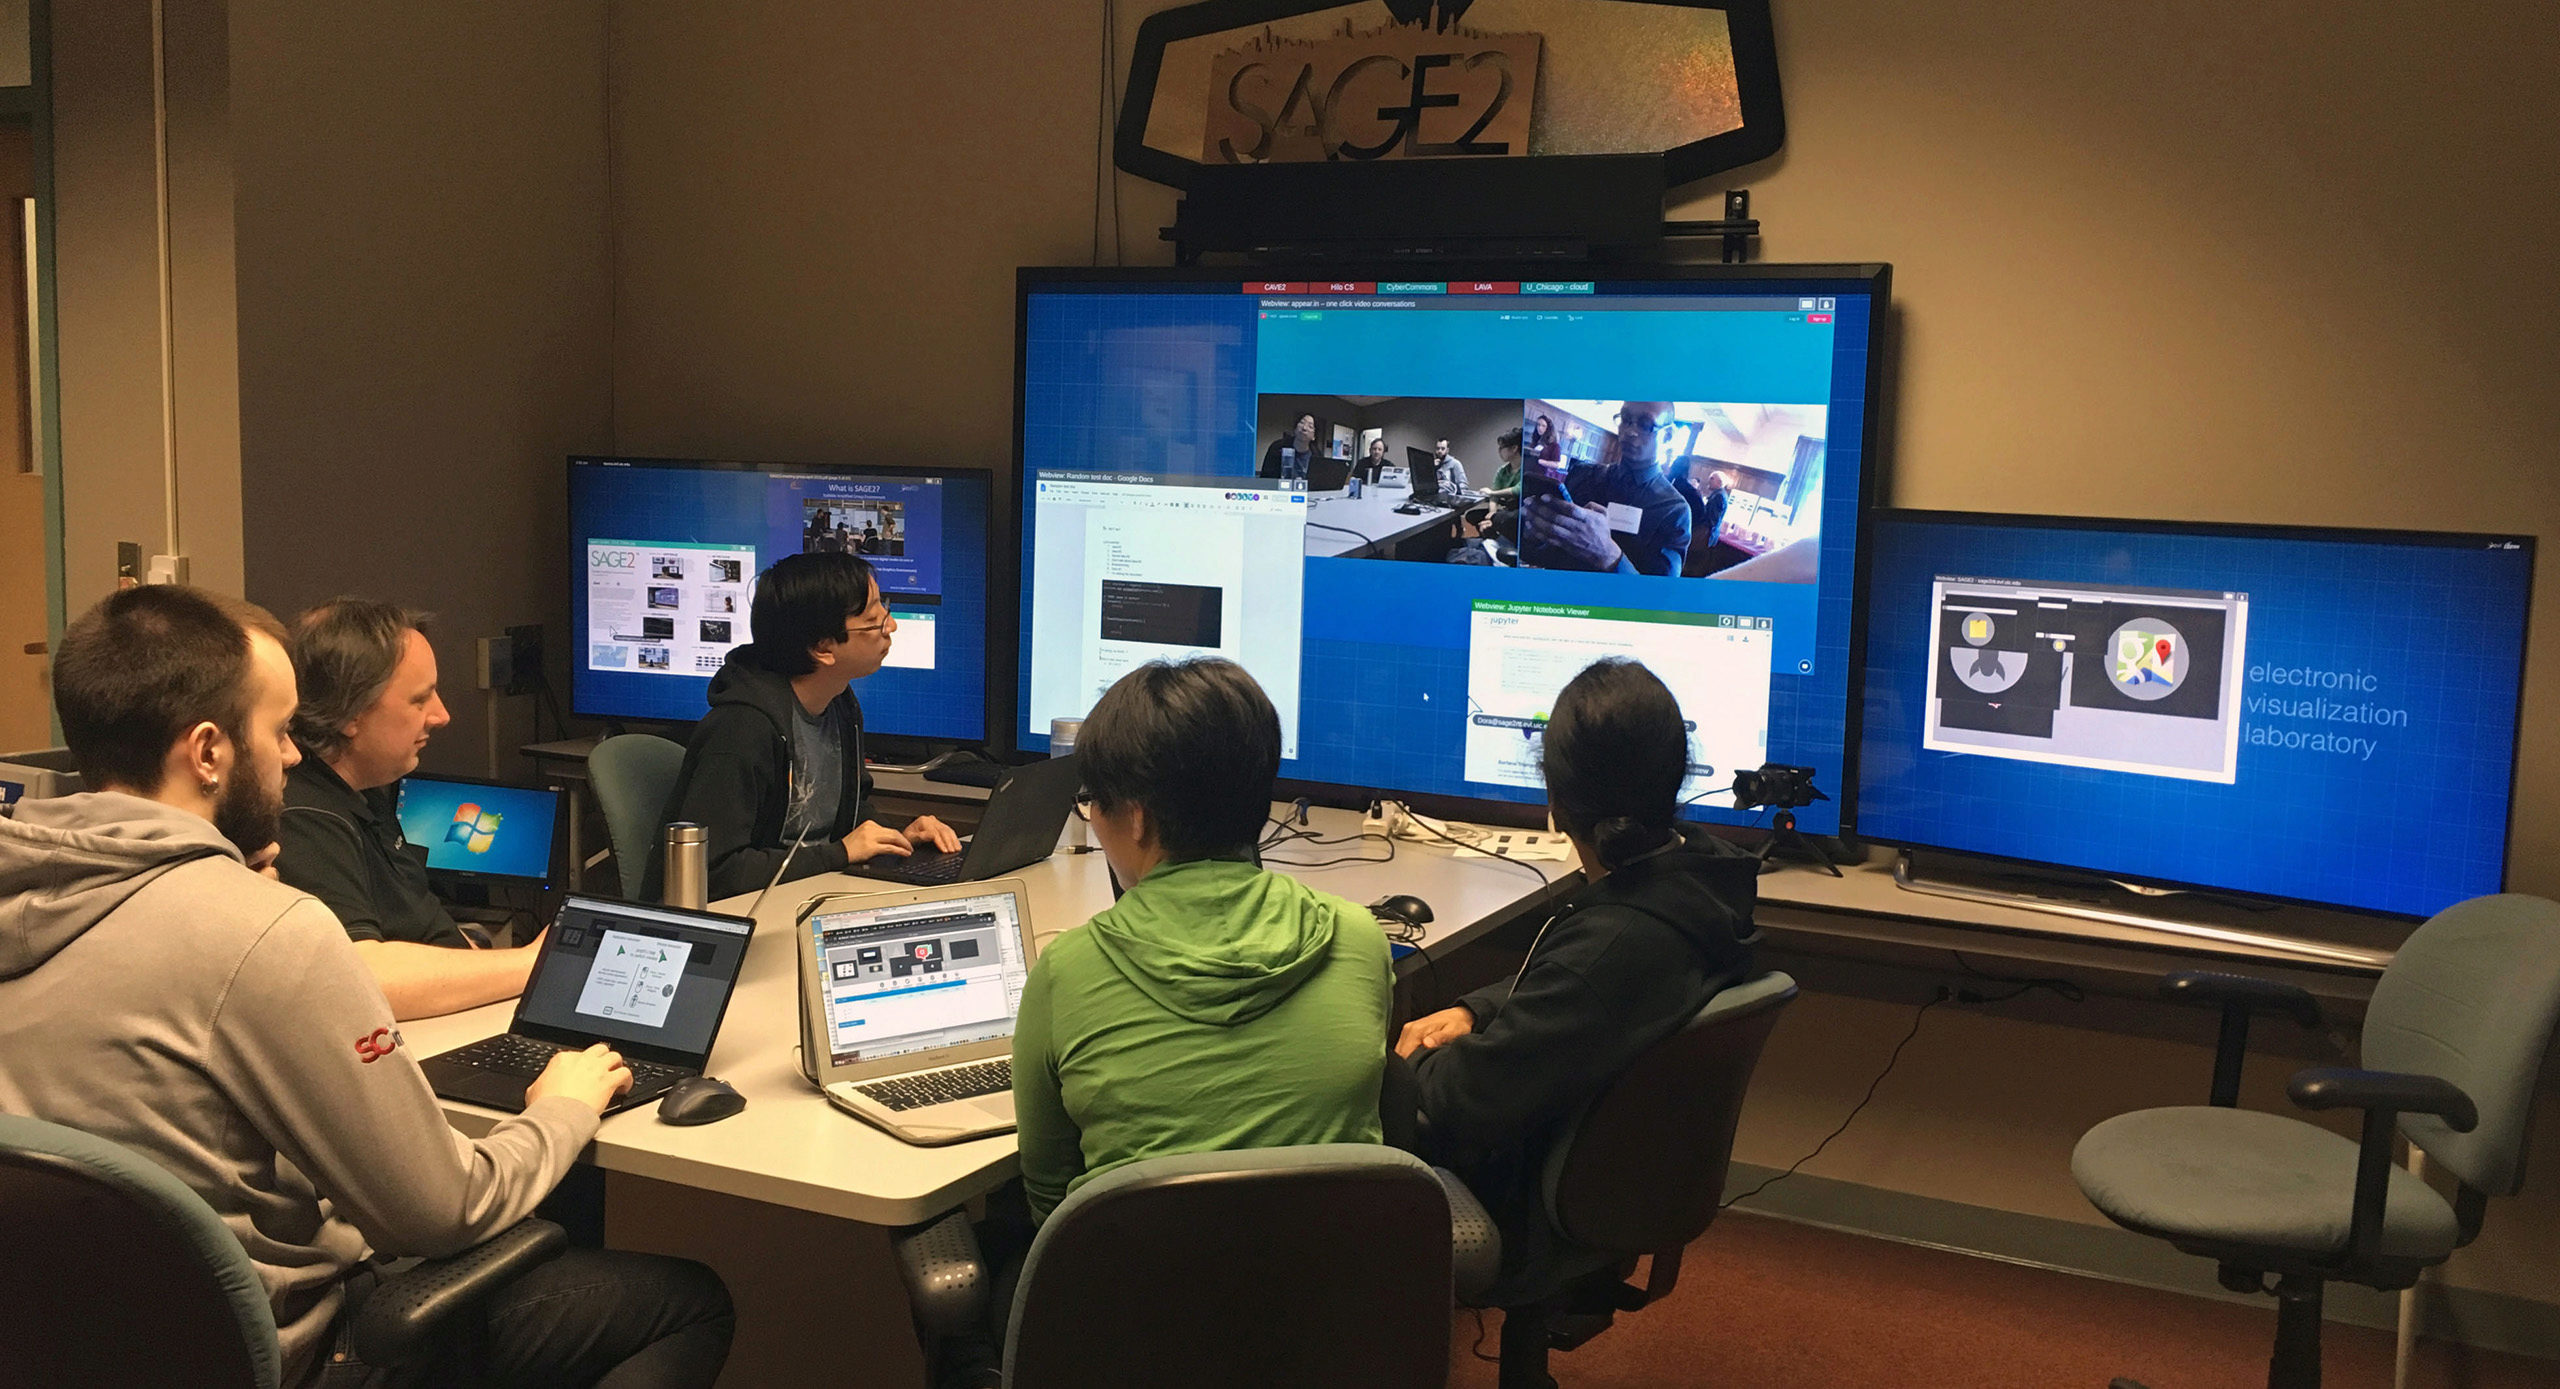 The SAGE2 team at UIC/EVL remotely collaborated with the University of Chicago’s Research Computing Center during its fourth annual research computing symposium and exposition, Mind Bytes.